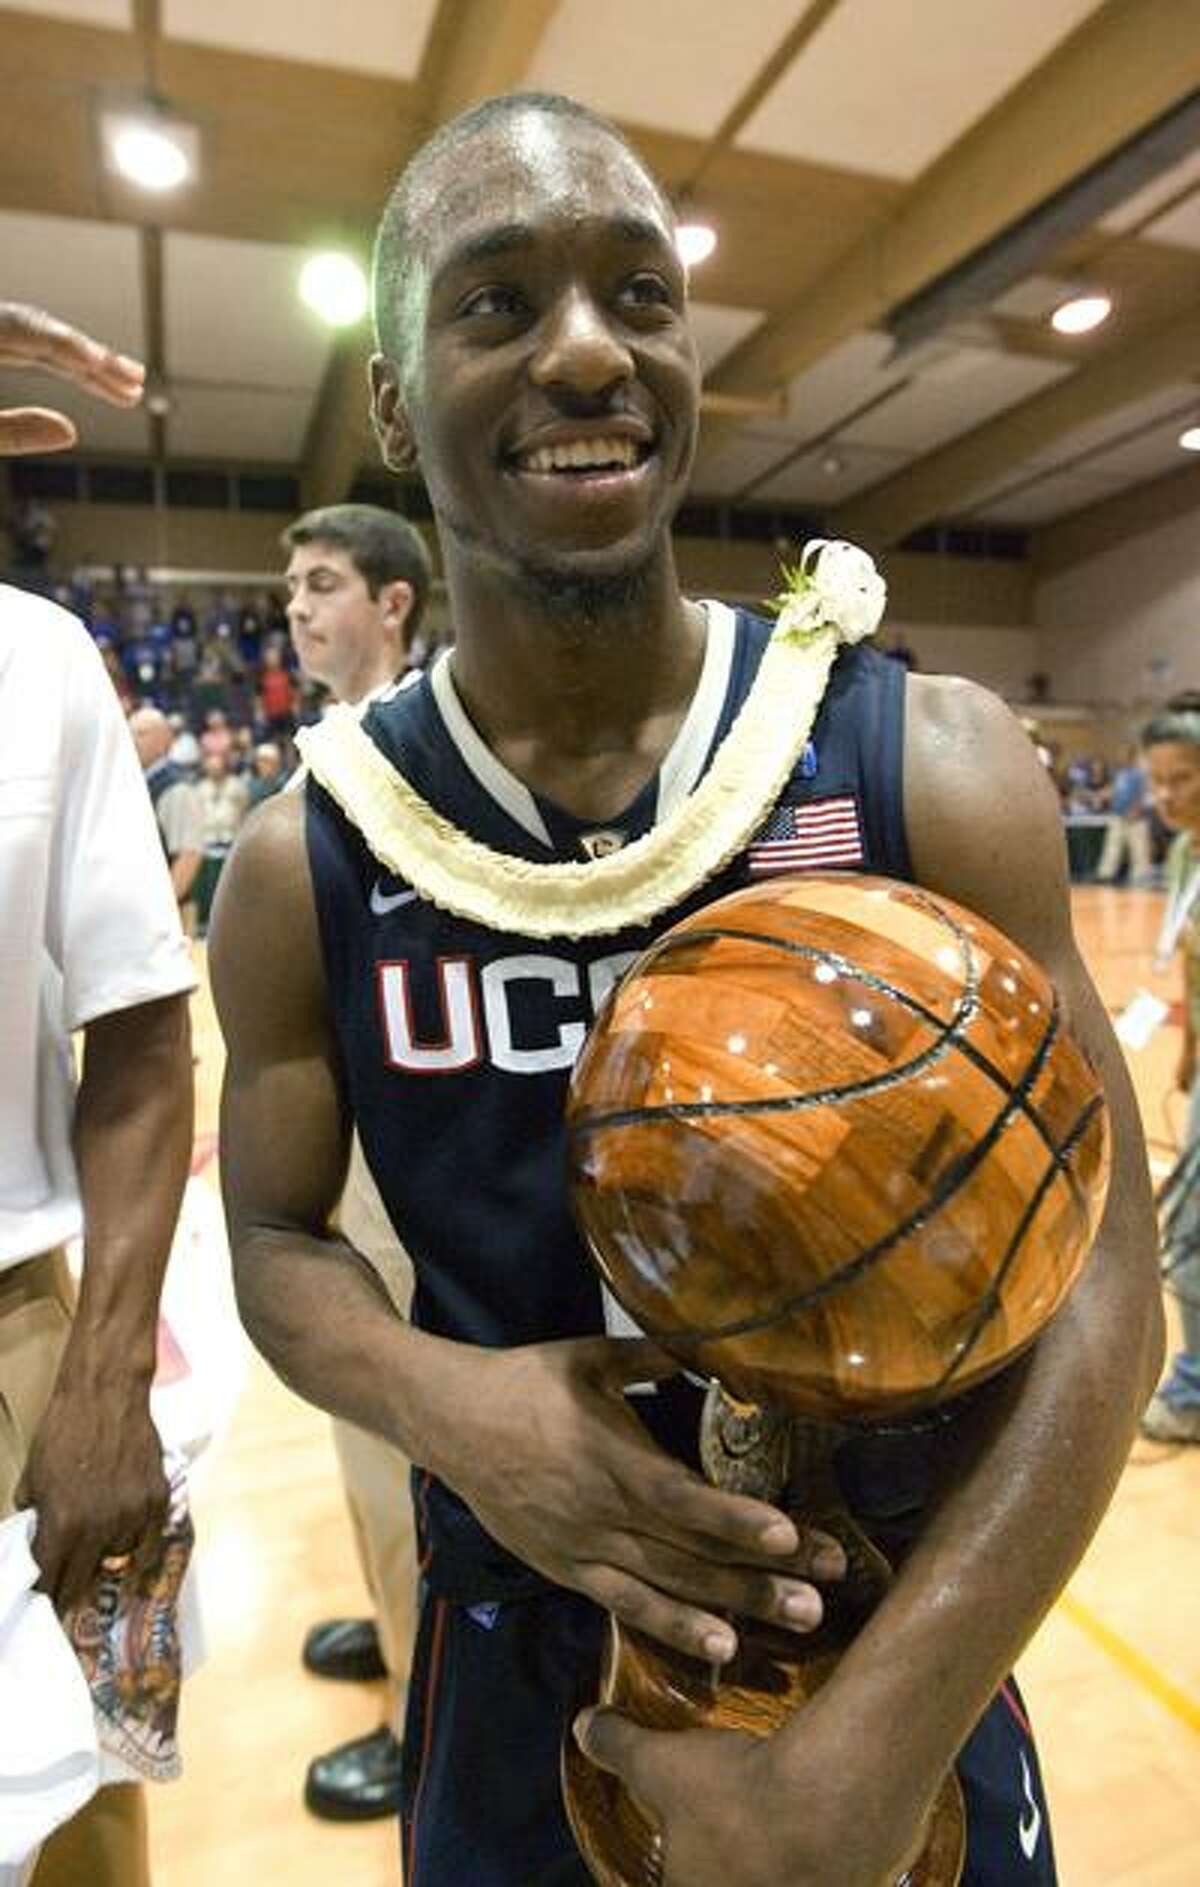 UConn men's basketball standout Kemba Walker signs with AS Monaco